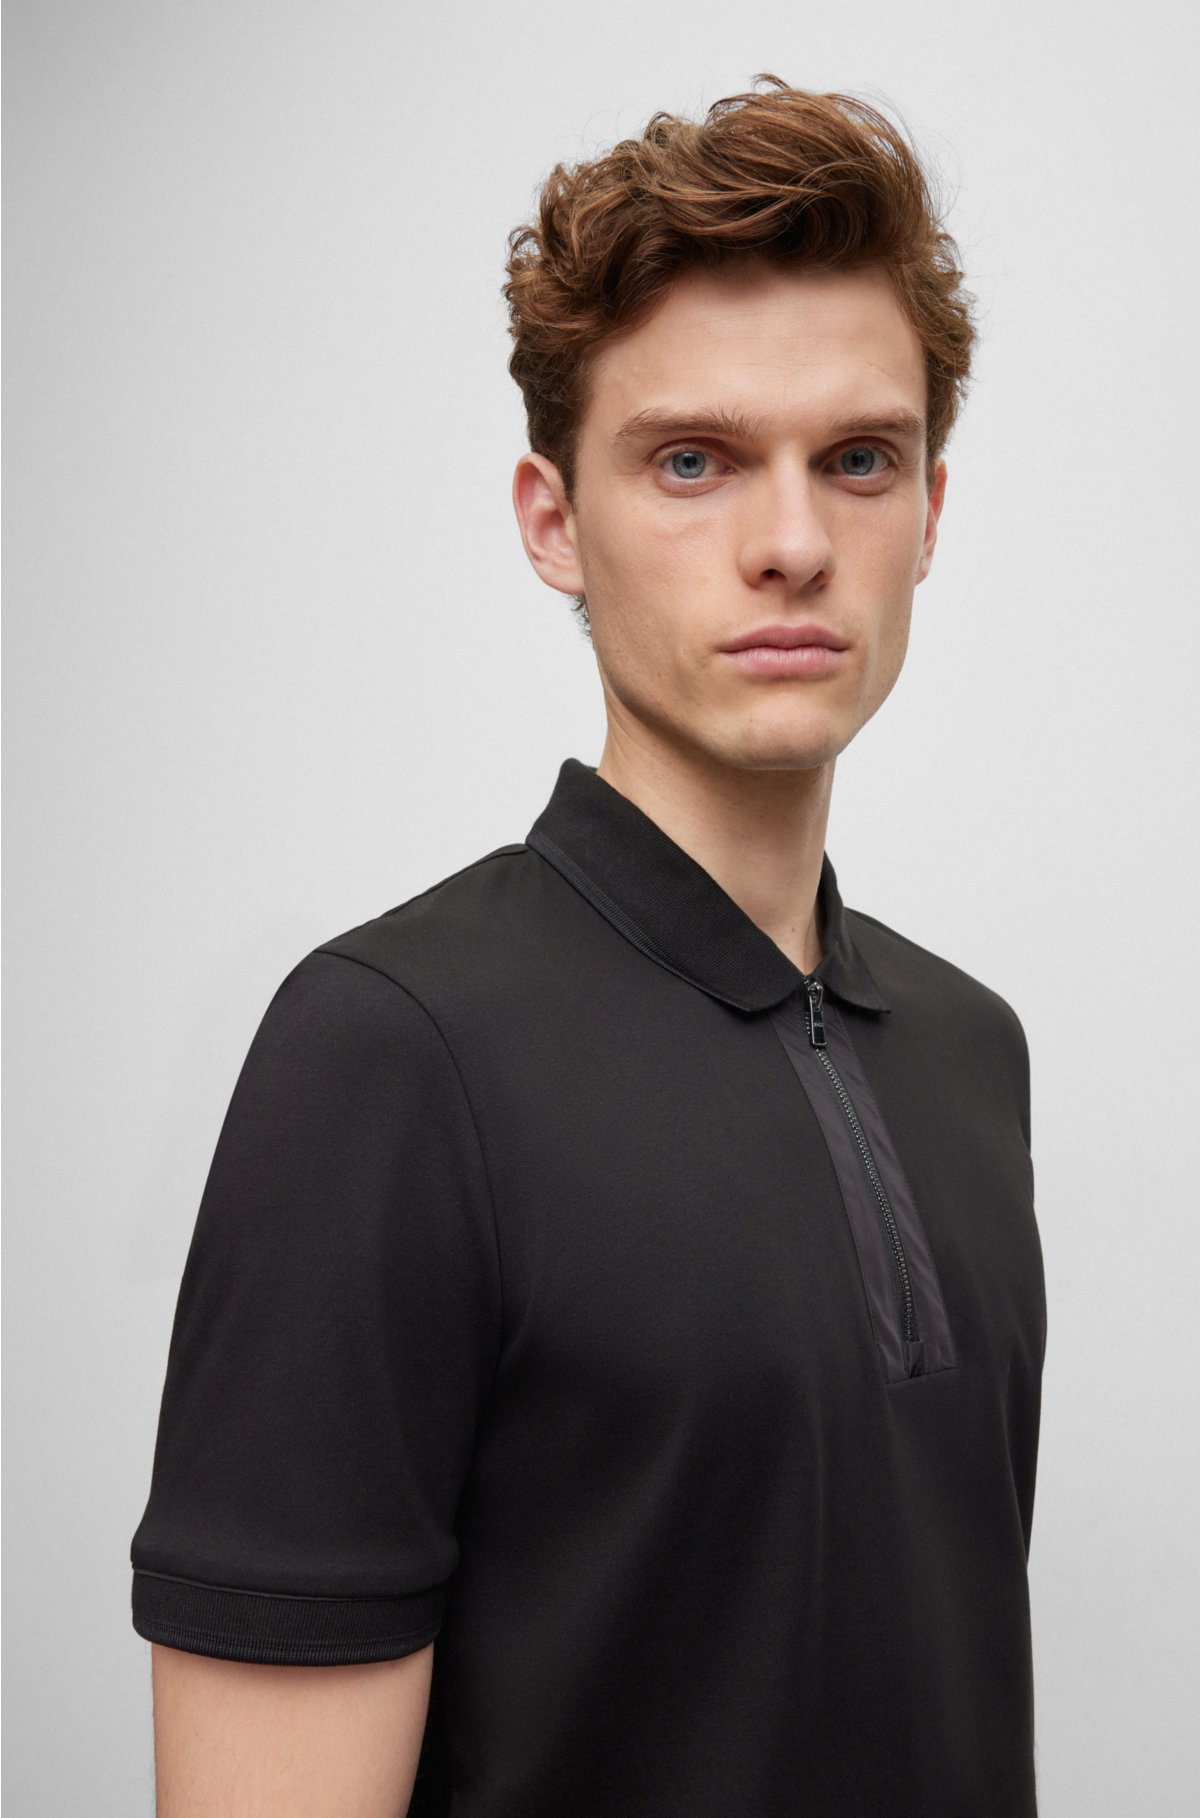 Mercerized-cotton polo shirt with zip placket